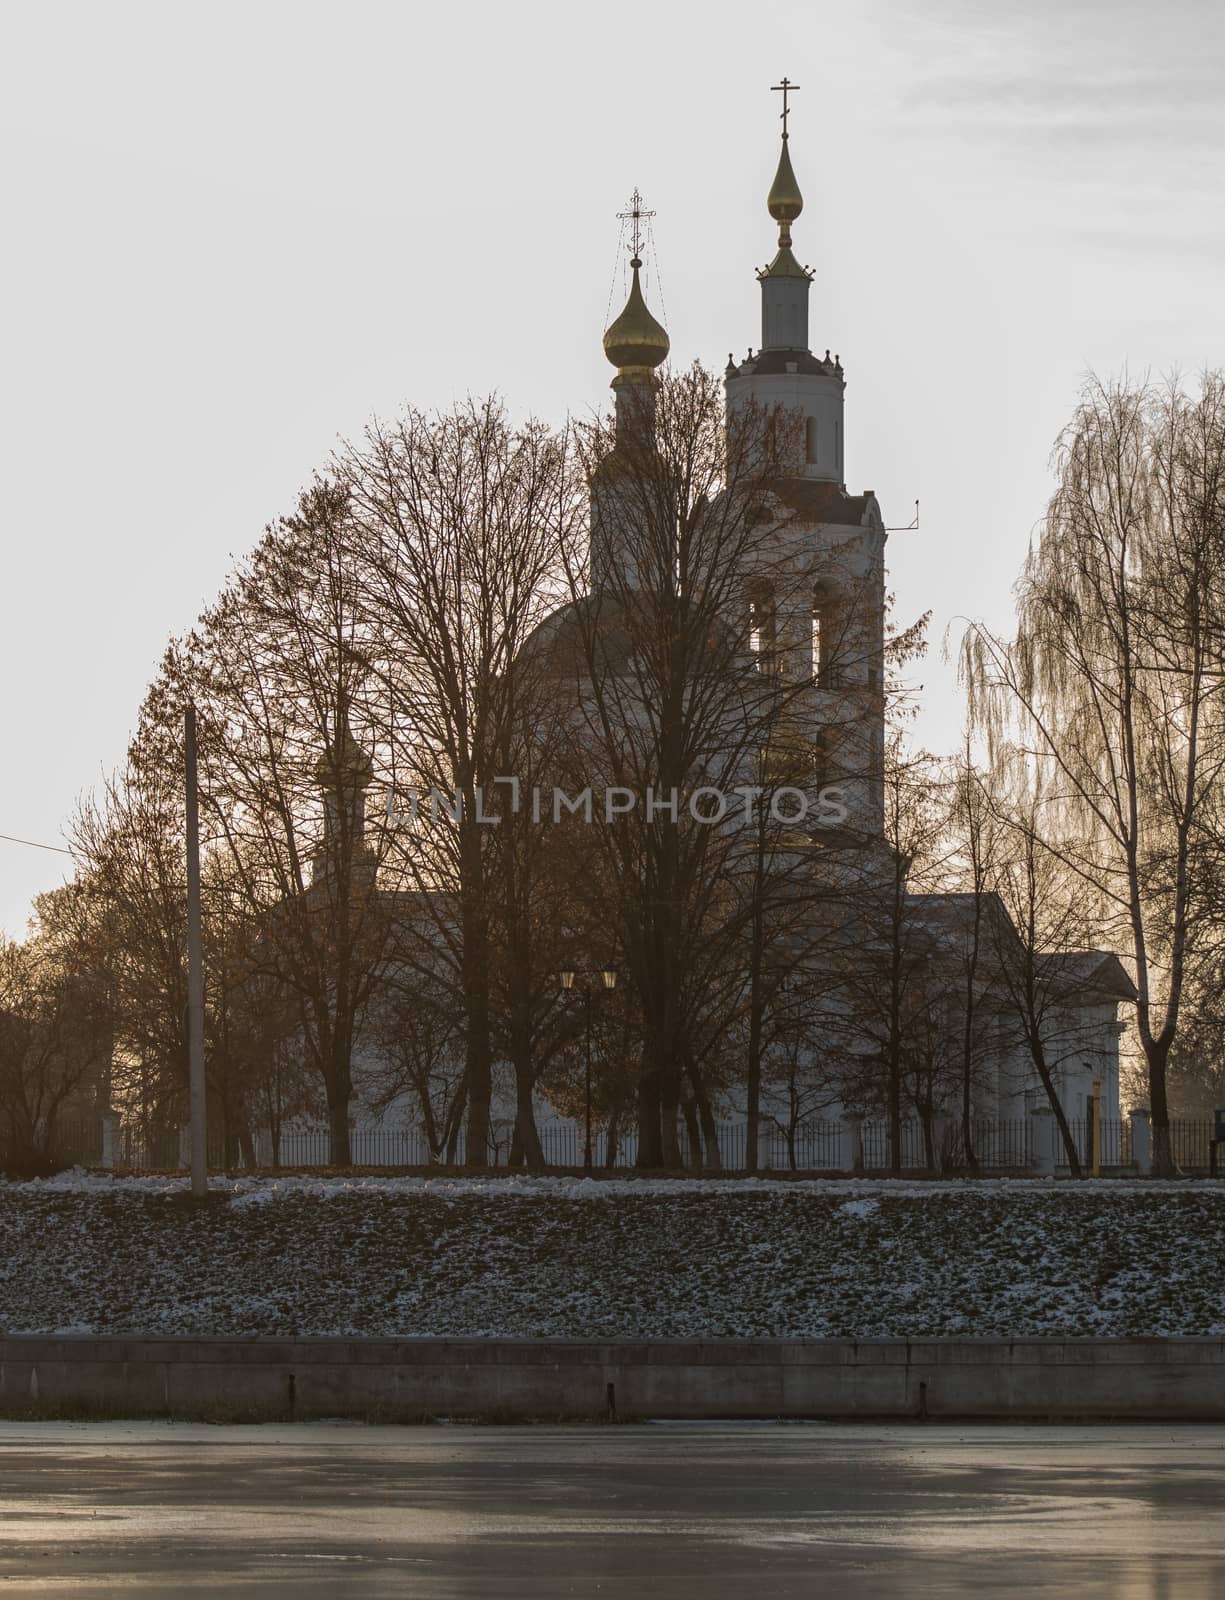 Sights of the Russian province by fifg